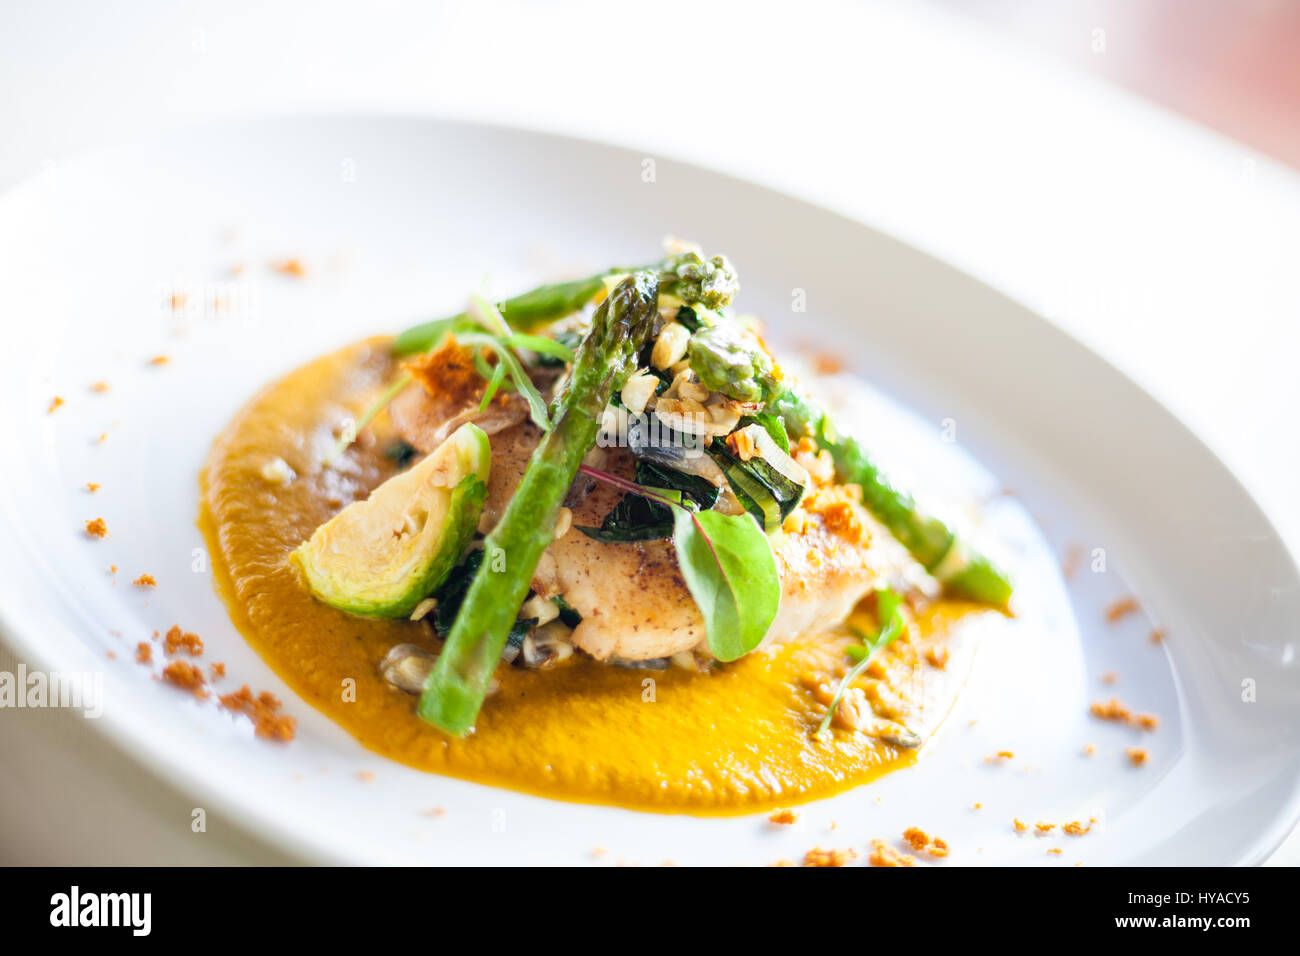 Fish filet covered in asparagus by Chef Marco Valdivia in Tepic, Nayarit, Mexico. Stock Photo